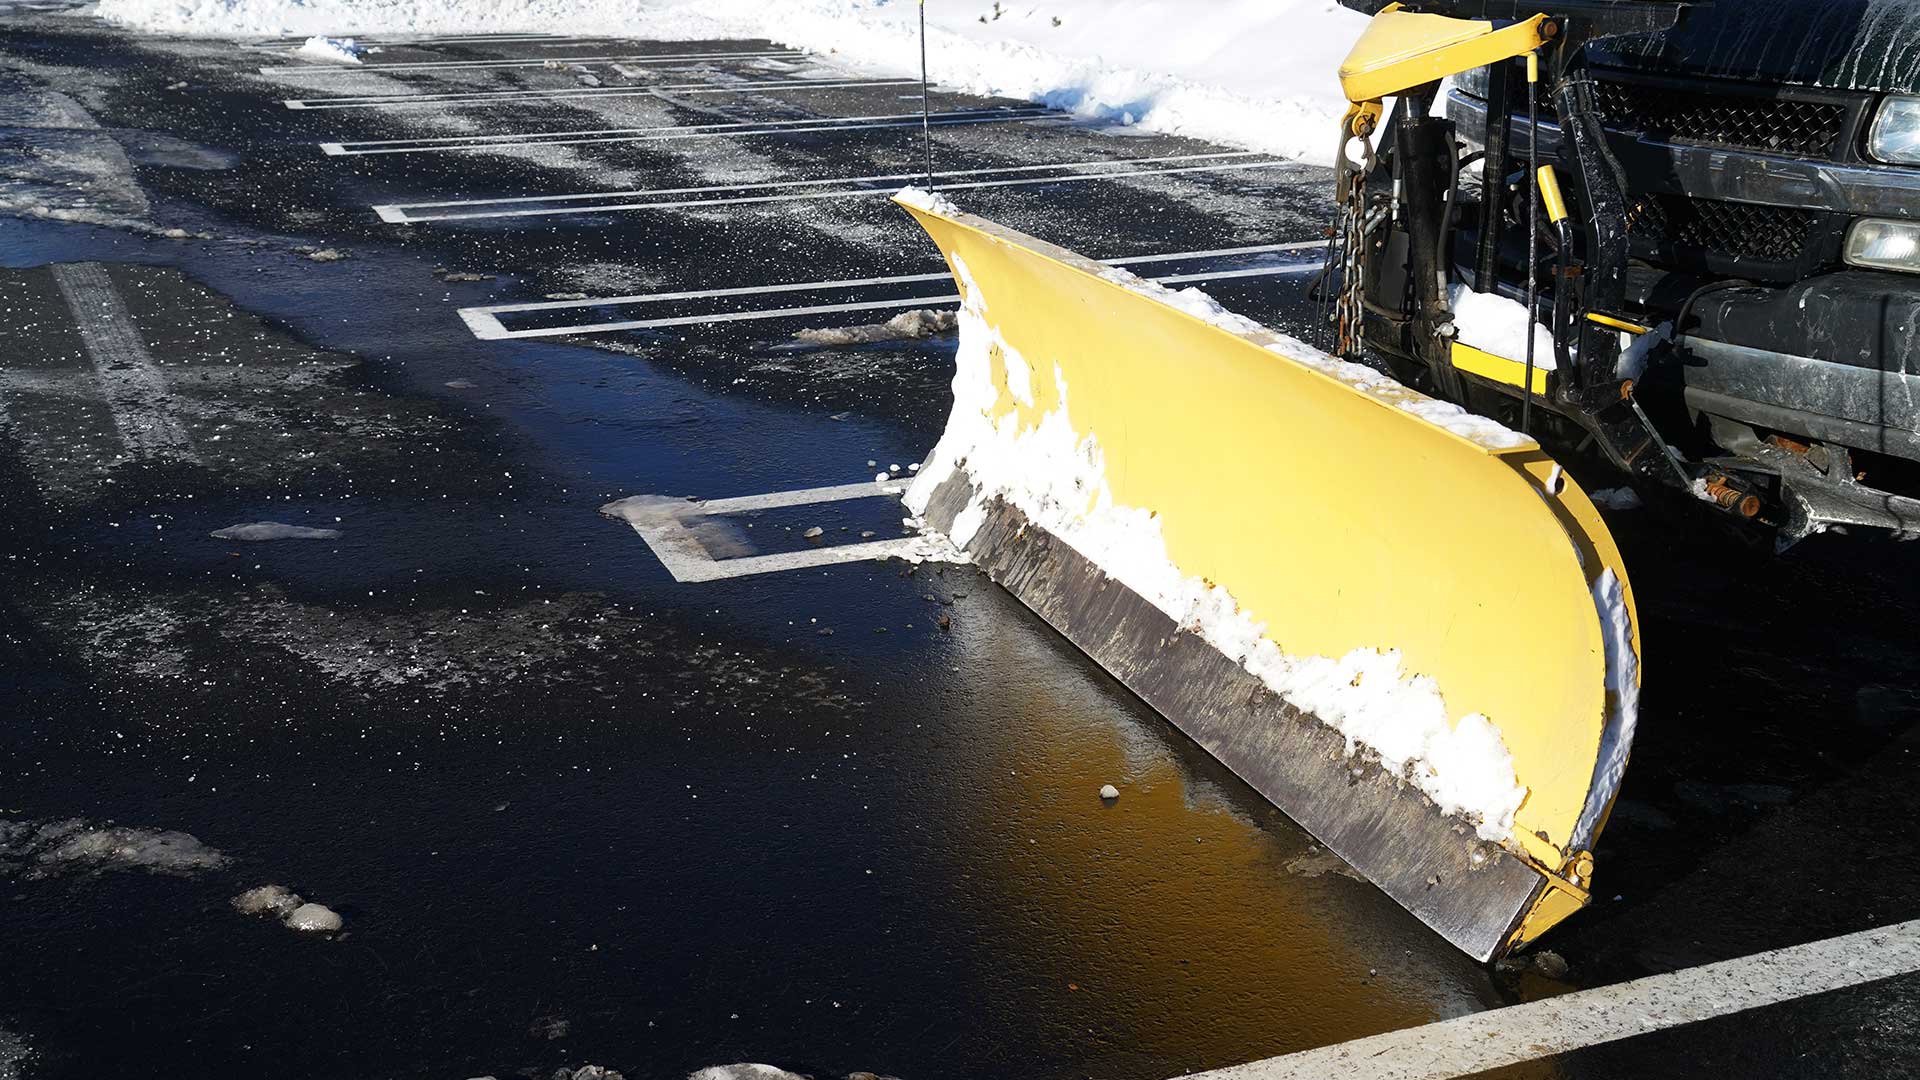 Snow plowing truck in a parking lot clear of snow and coated with salt to melt the ice.